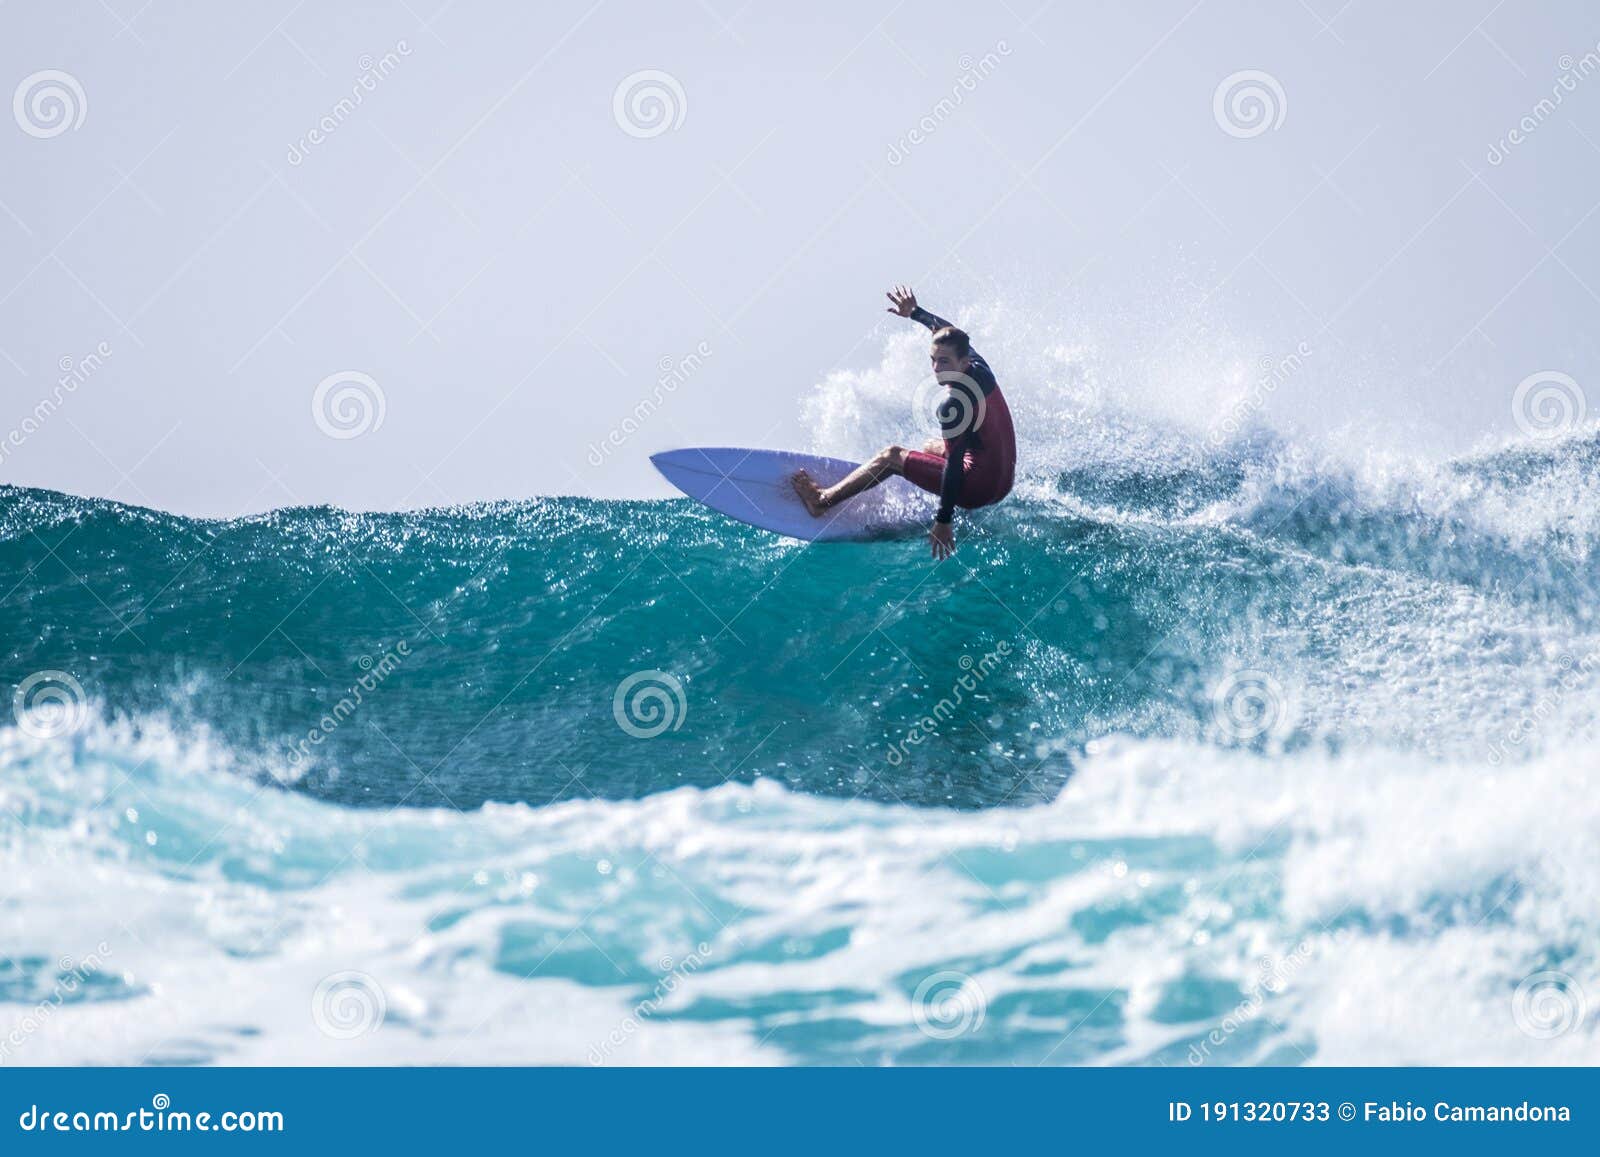 teenager surfing at the wave in tenerife playa de las americas - red wetsuits and beautiful and perfect wave